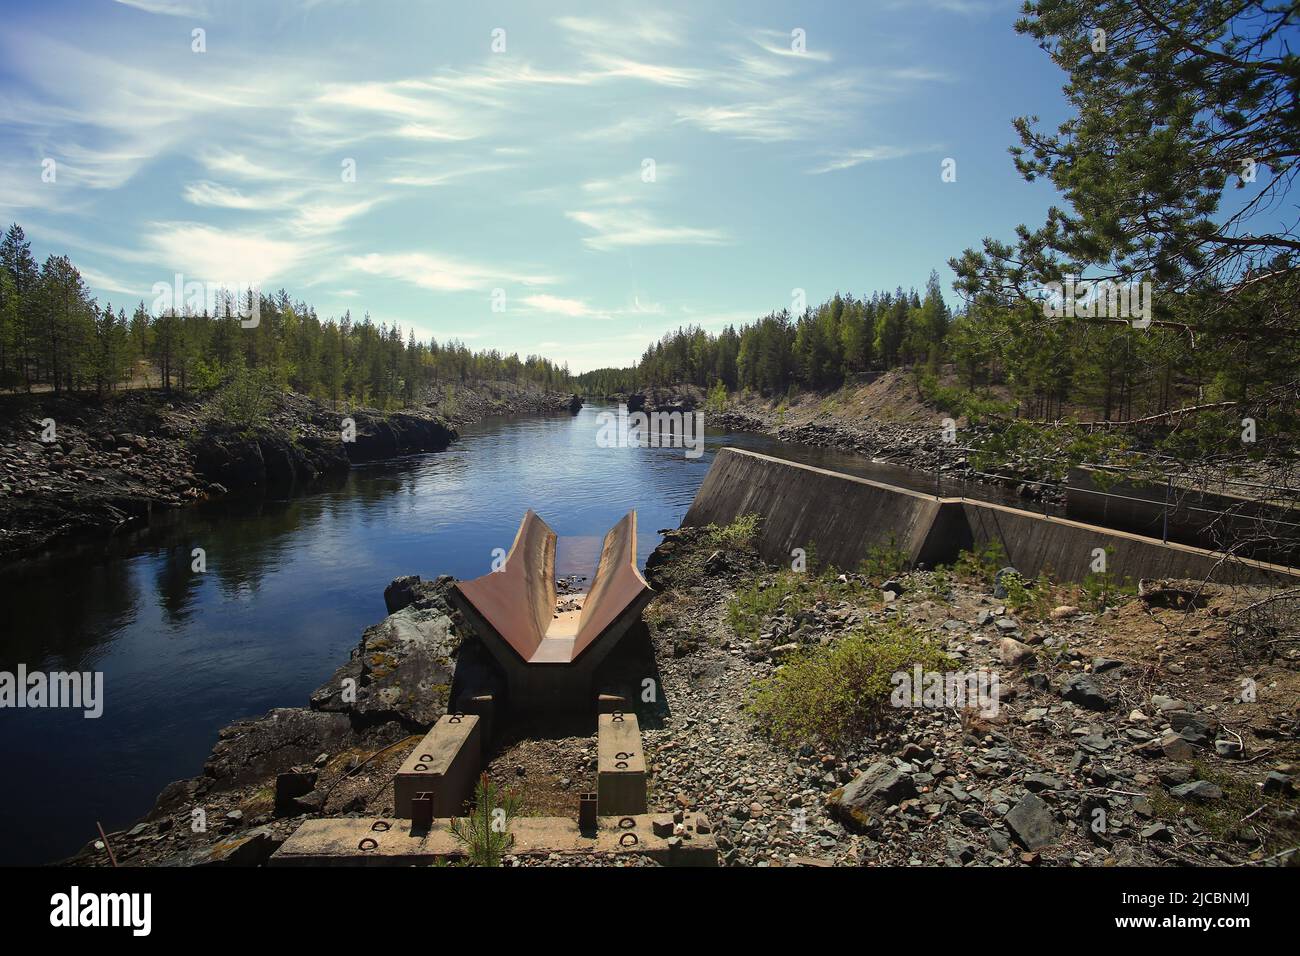 Steel ramp at a northern Swedish river, once used for stream regulation. Stock Photo